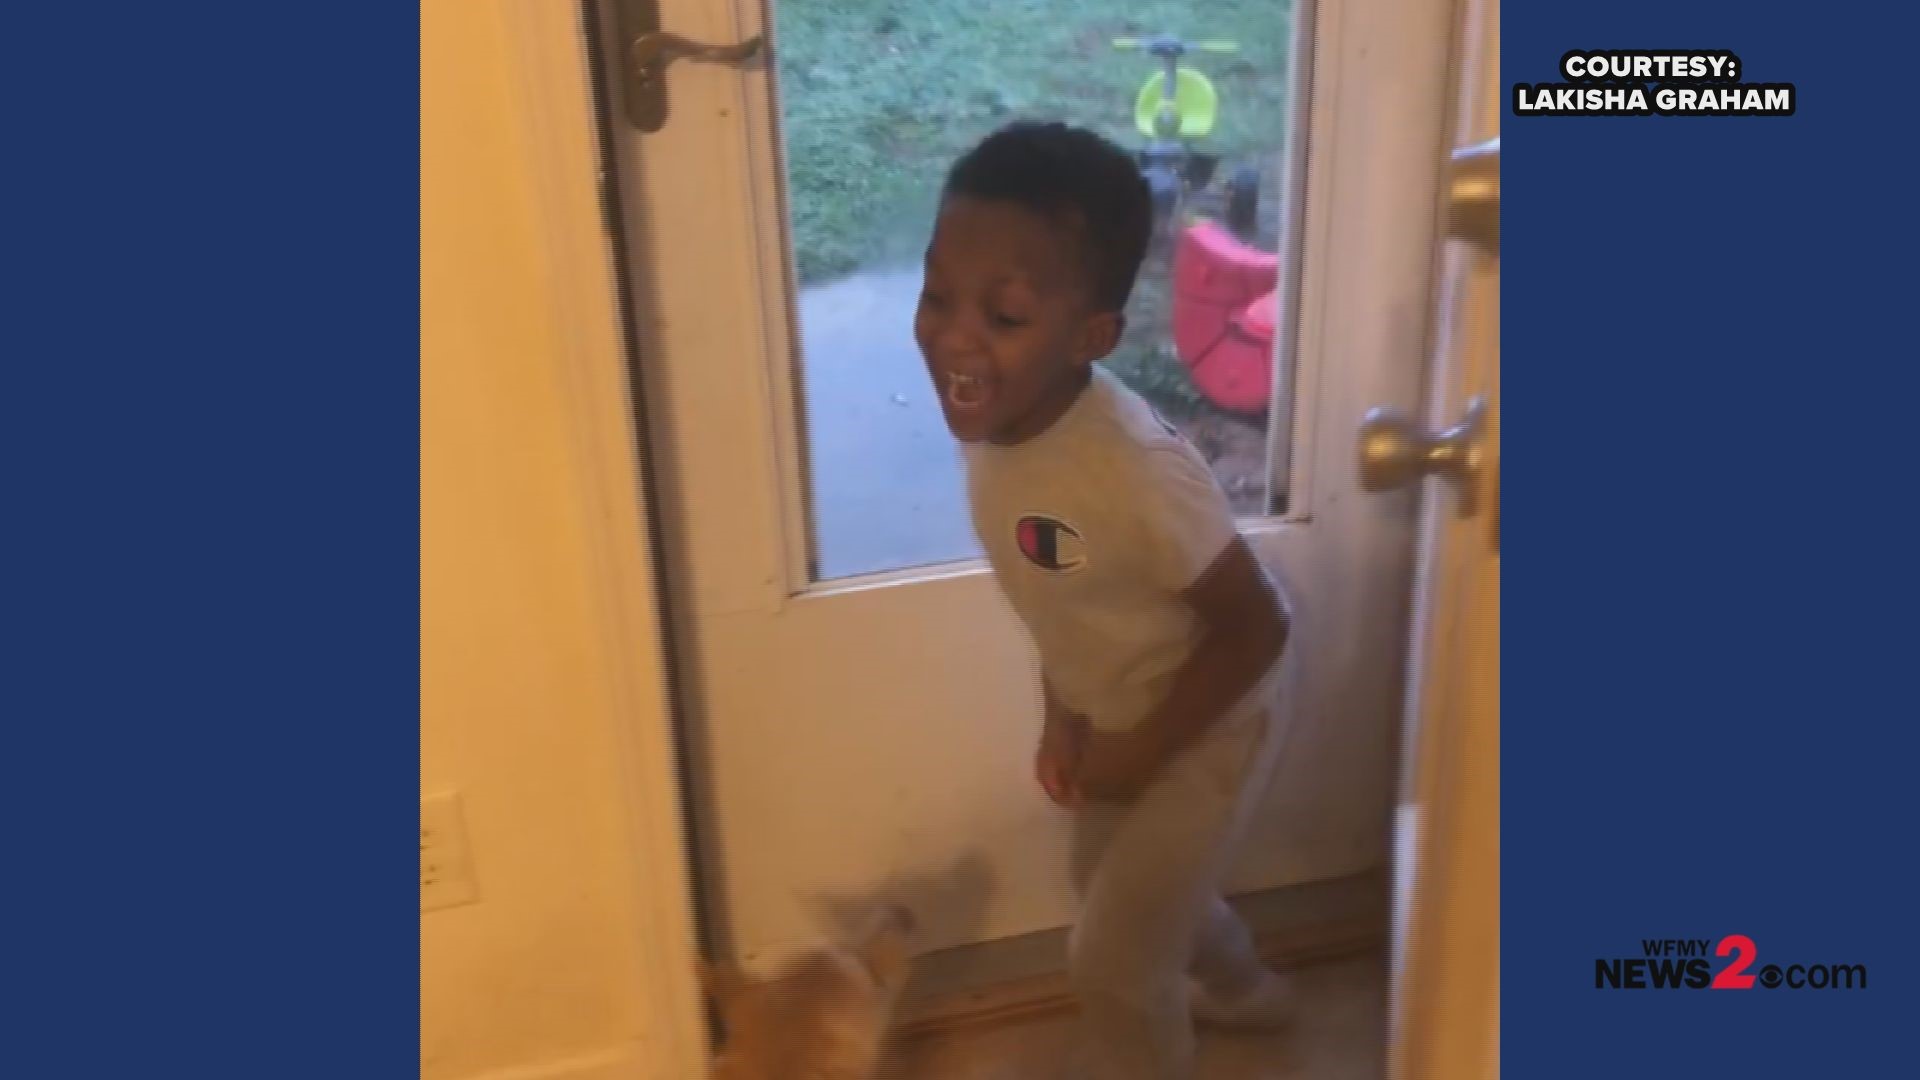 5-year-old Cameron had no idea snow was in the forecast today. His mom surprised him in the best way possible!